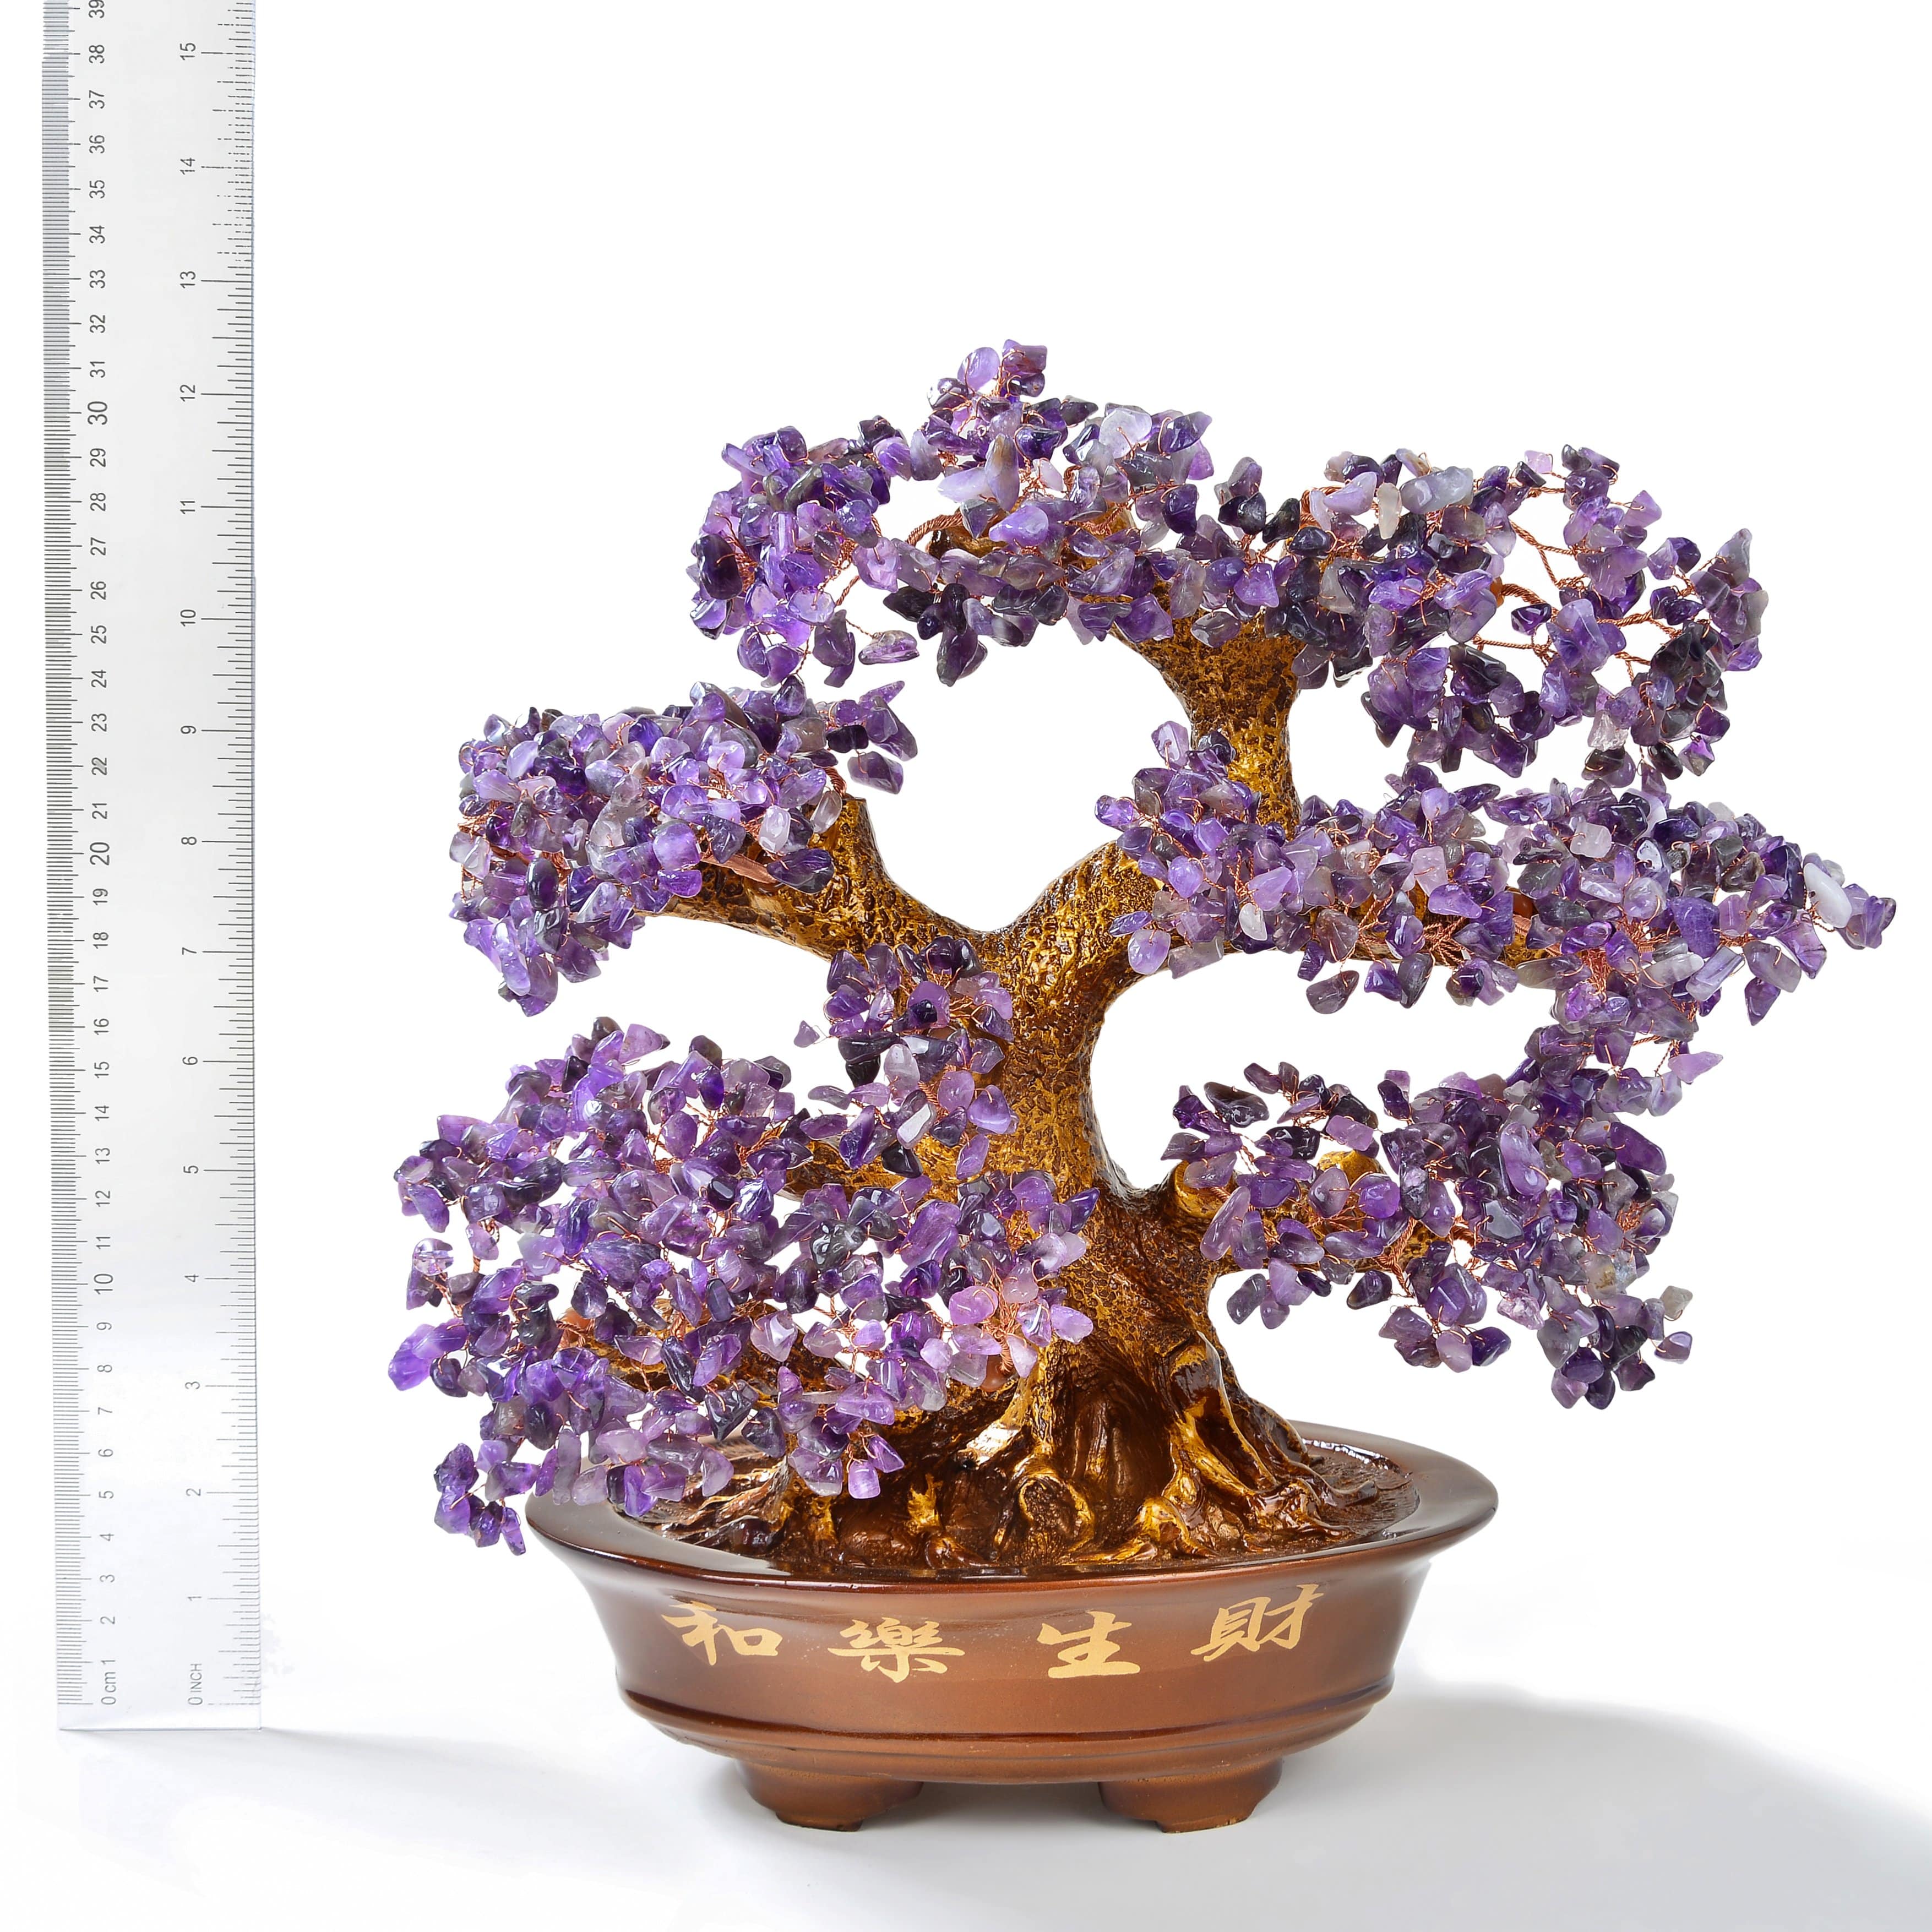 Kalifano Gemstone Trees Amethyst Tree of Life on Resin and Wood Base with 1,251 Natural Gemstones K9151-AM